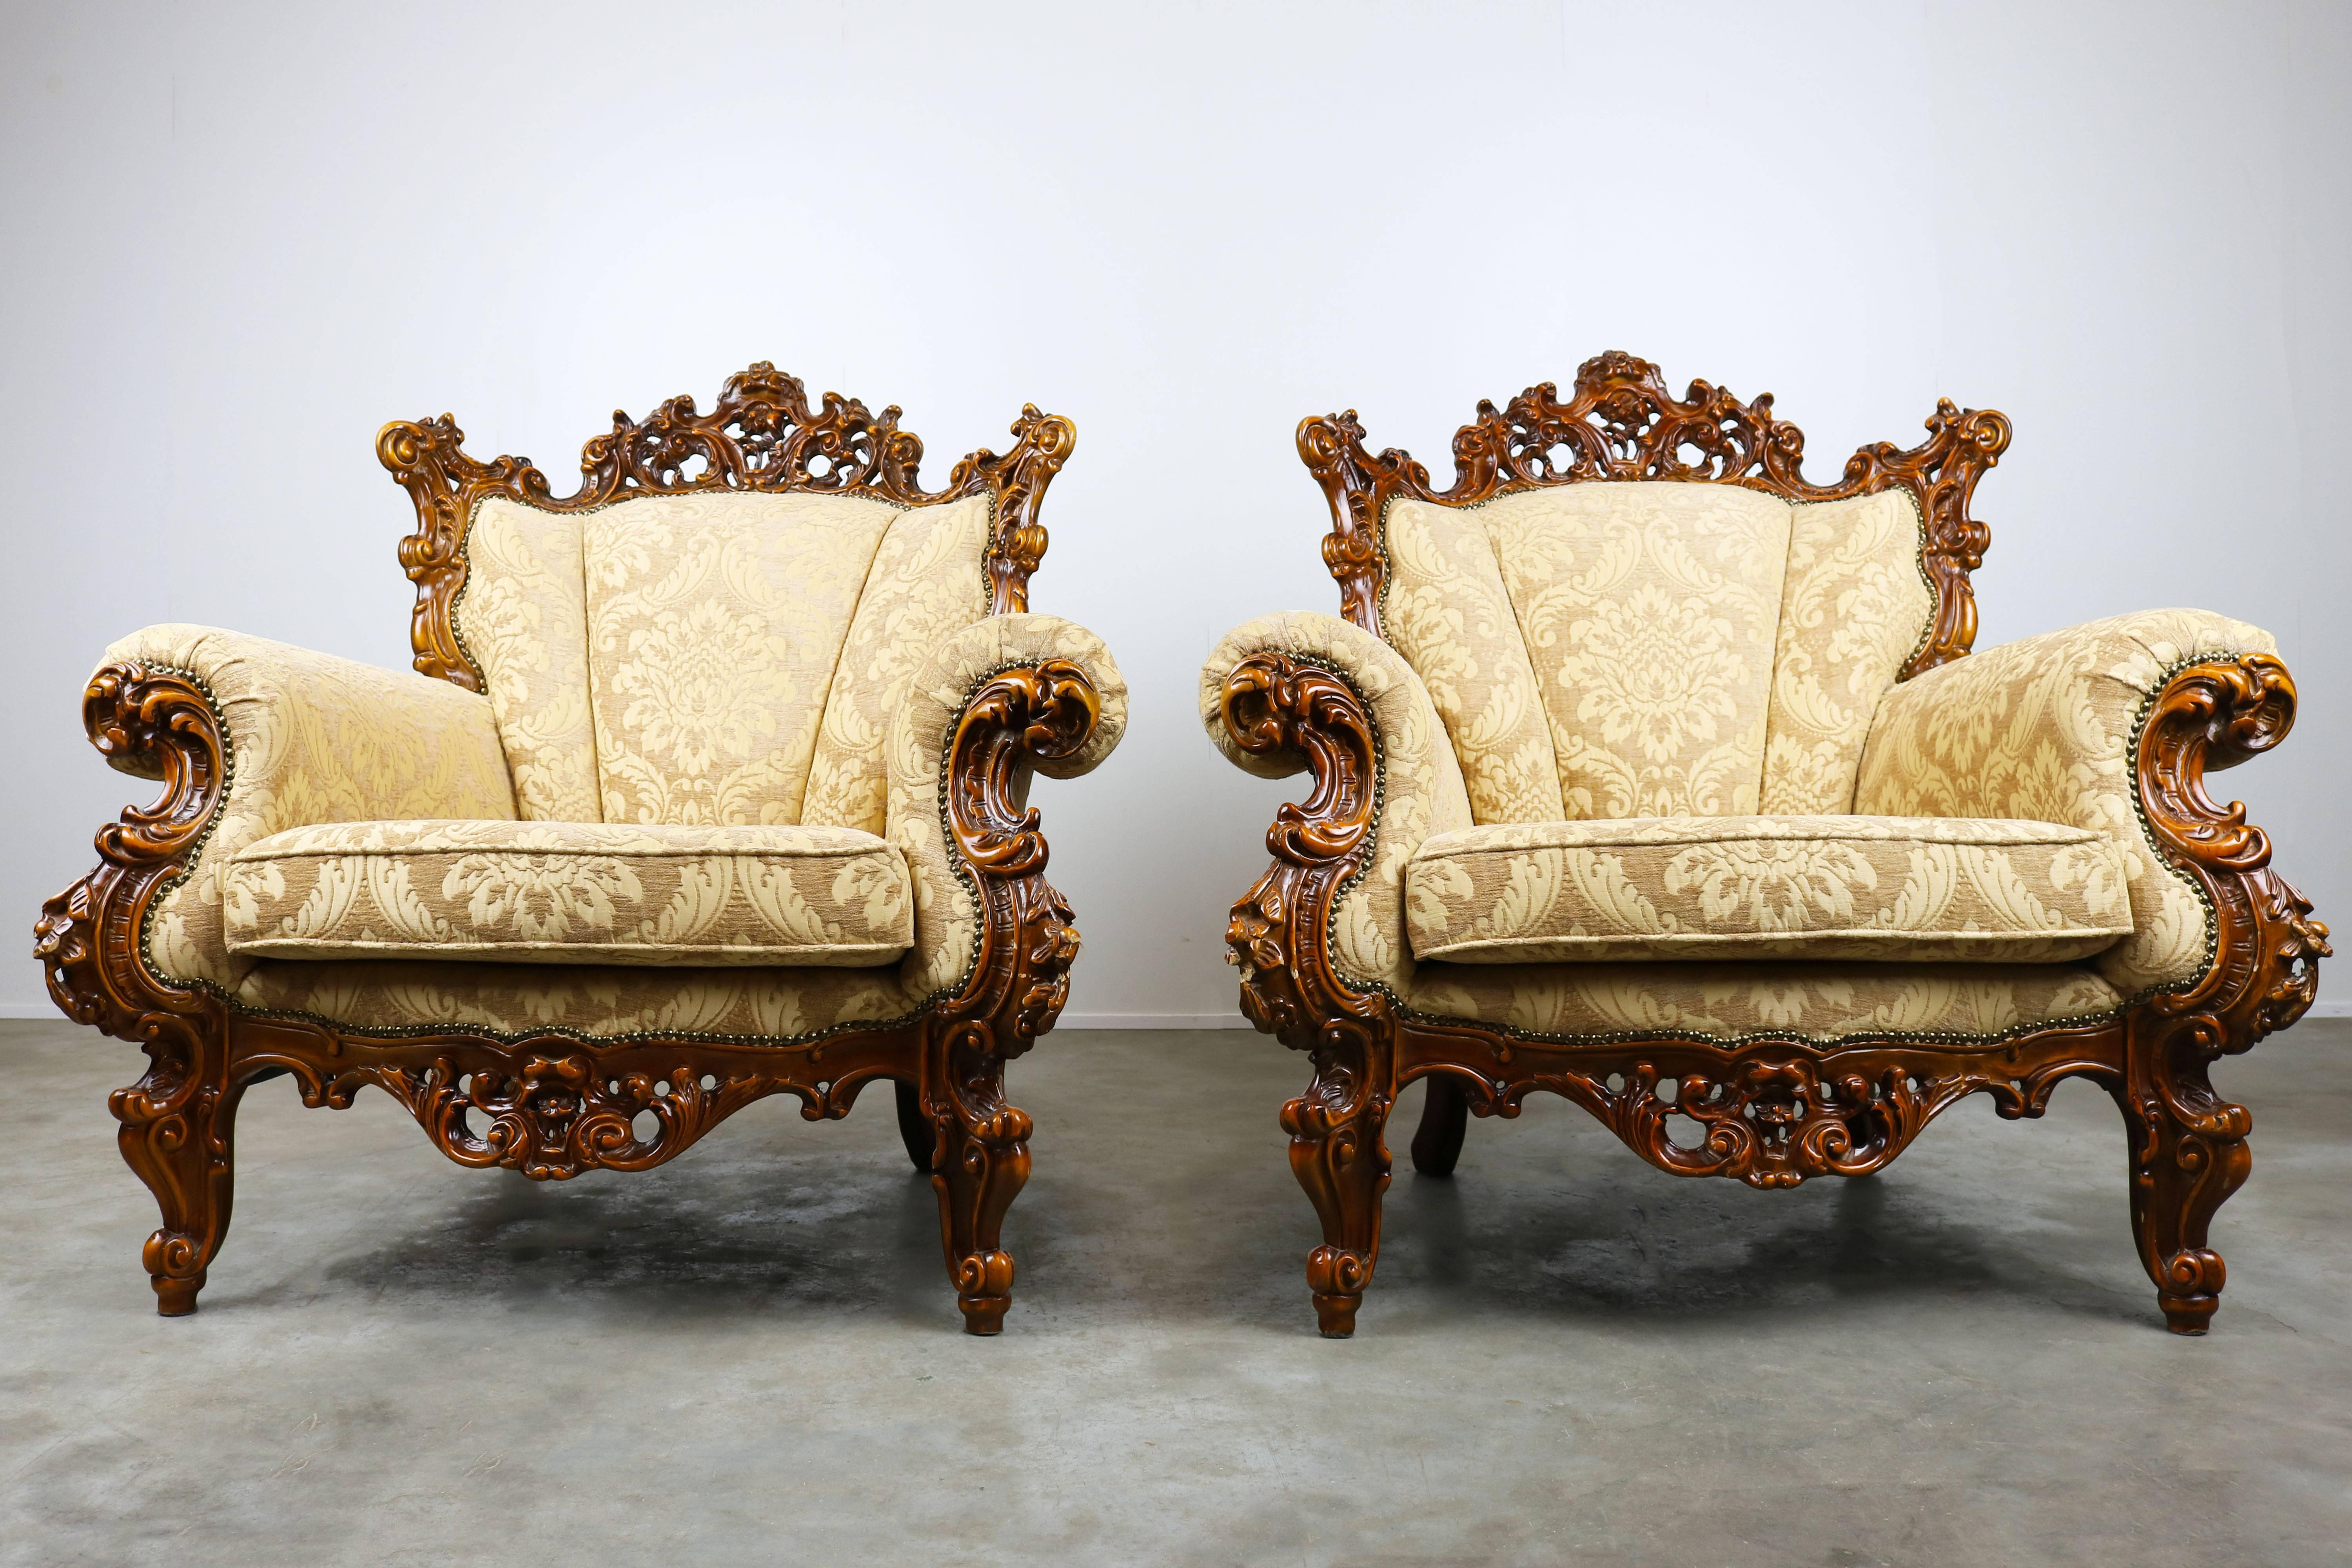 A wonderful pair of luxurious antique Italian lounge chairs in Rococo / Baroque style. The chairs are recently re-upholstered and have a royal and warm feeling. They are very comfortable and in perfect shape. Great eye catchers for any living room.